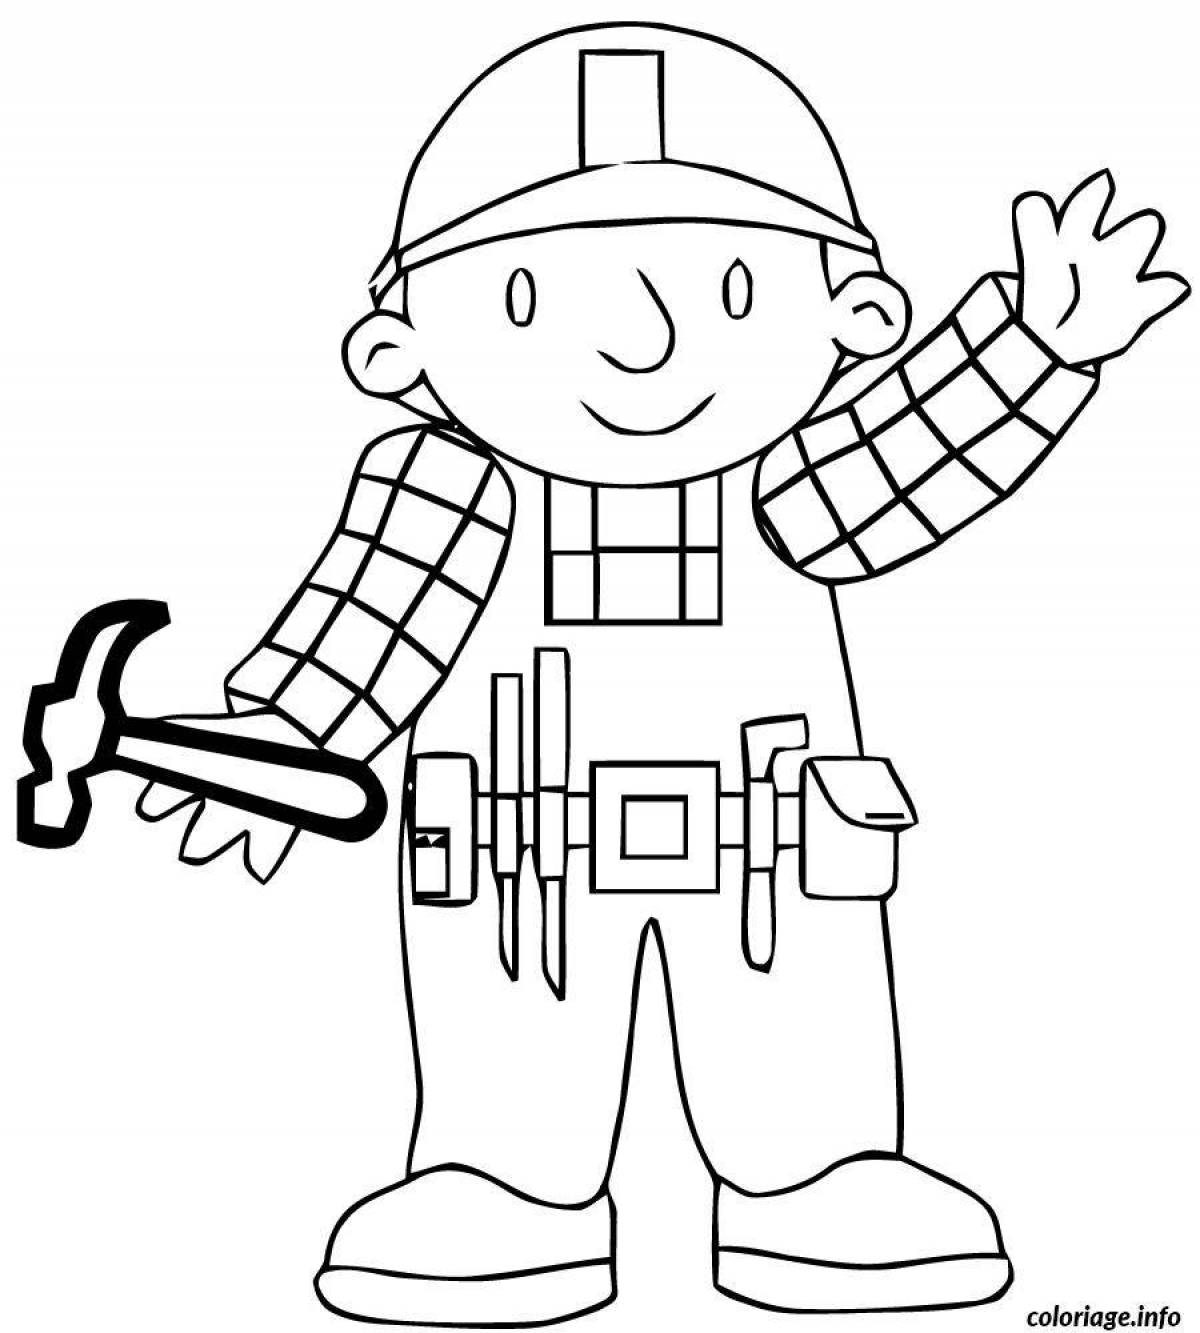 Happy Builder Coloring Page for Kids